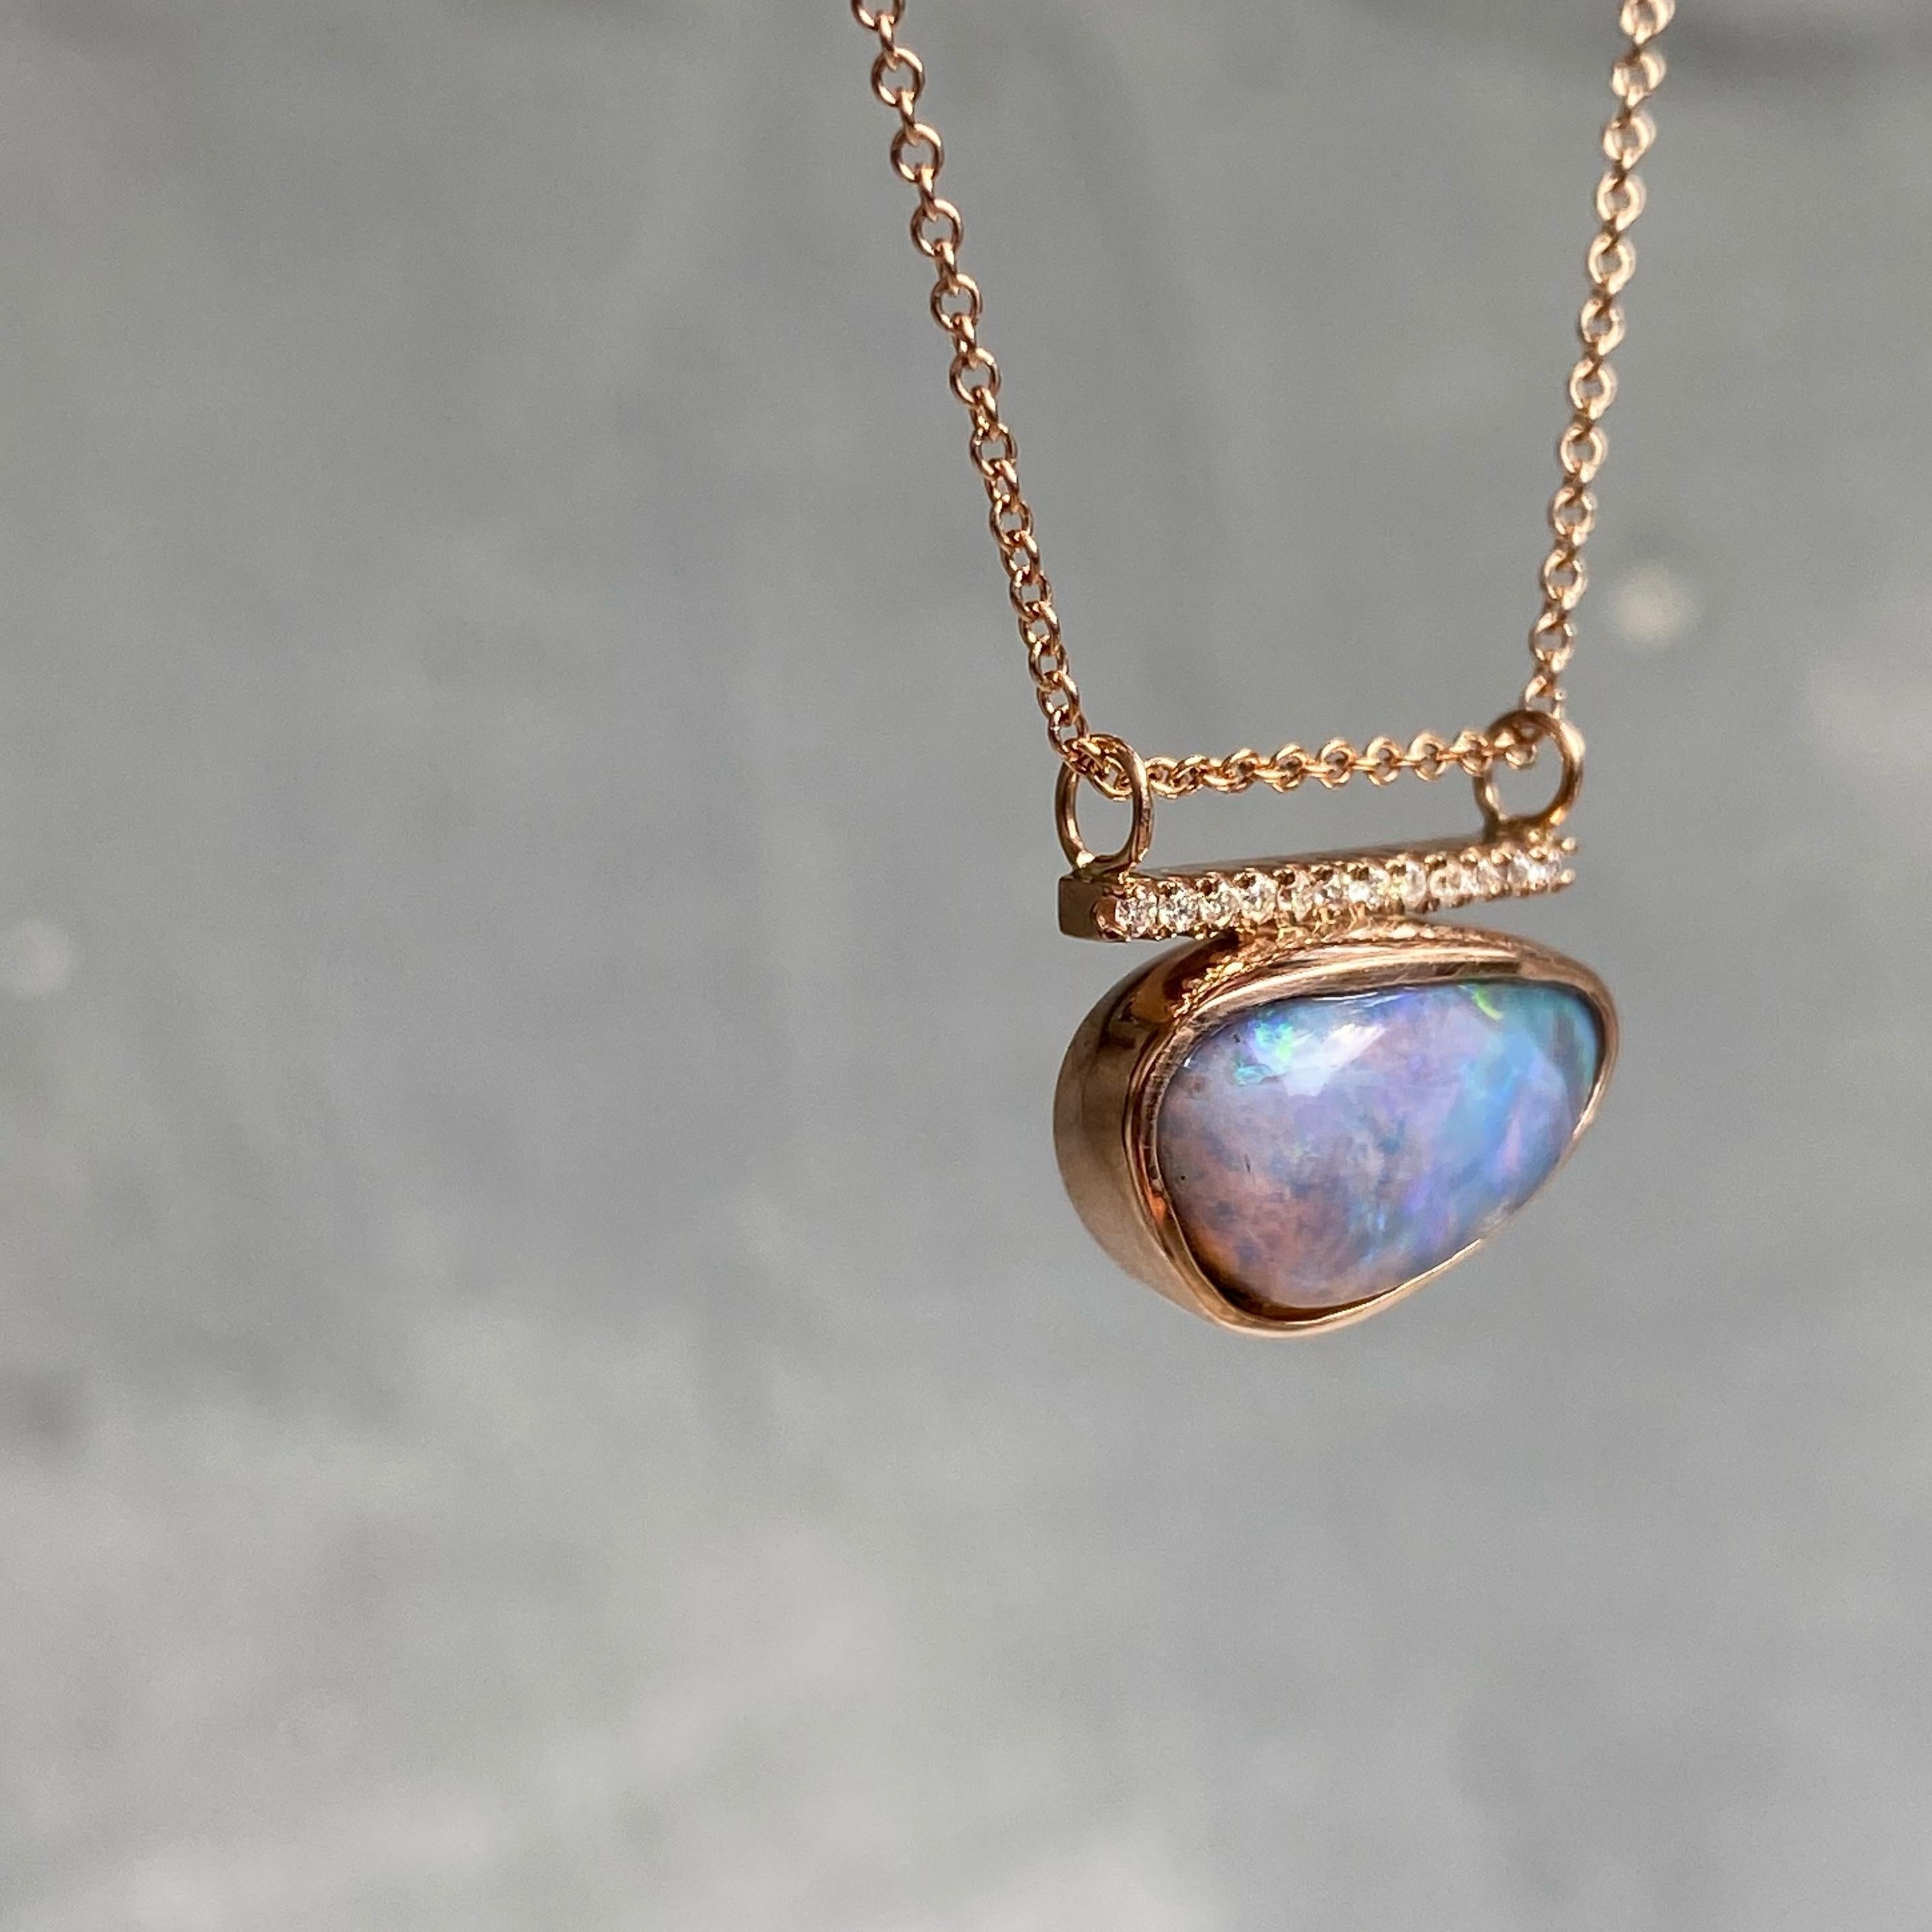 Brilliant Cut Head in the Clouds Rose Gold Opal Necklace No. 15 with Diamonds by NIXIN Jewelry For Sale